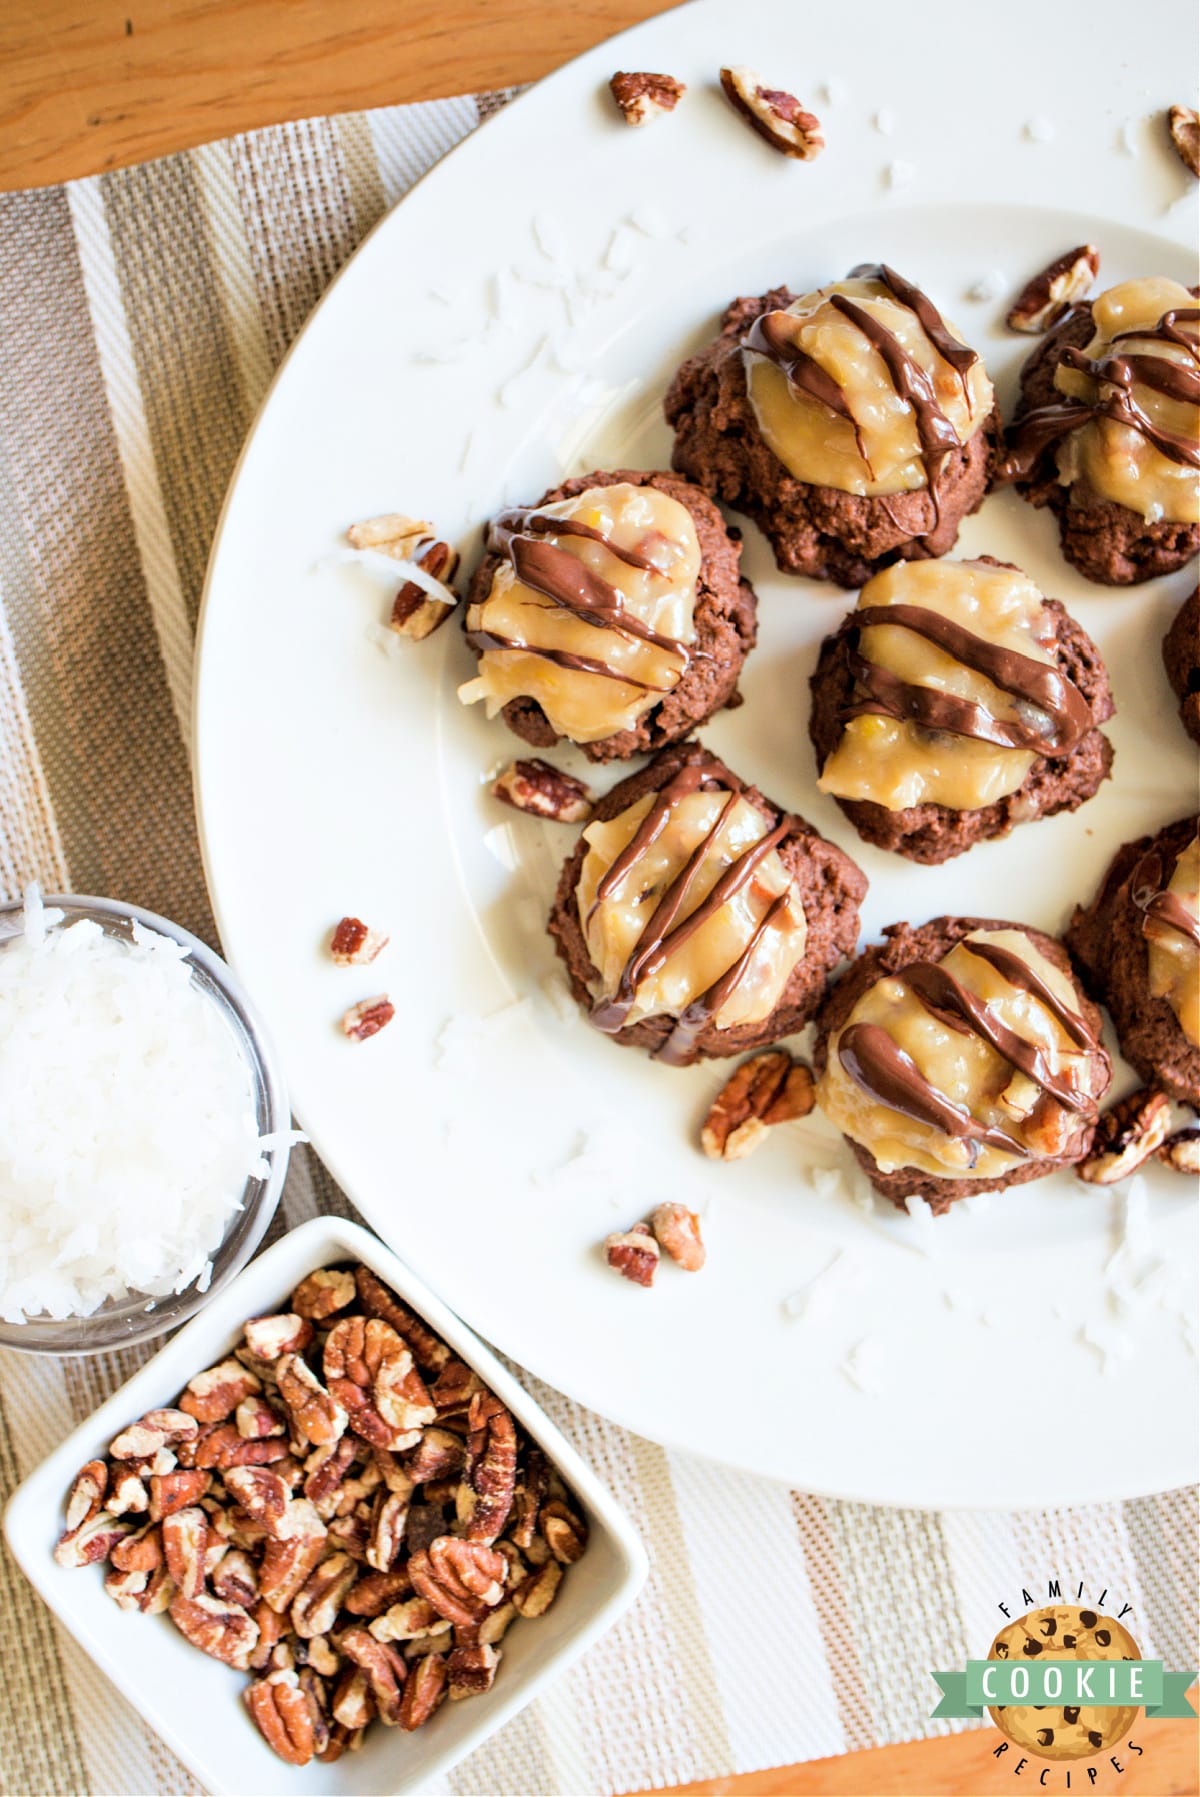 German Chocolate Cookies made from scratch with a double chocolate cookie that is topped with a creamy coconut pecan topping and a chocolate drizzle. 